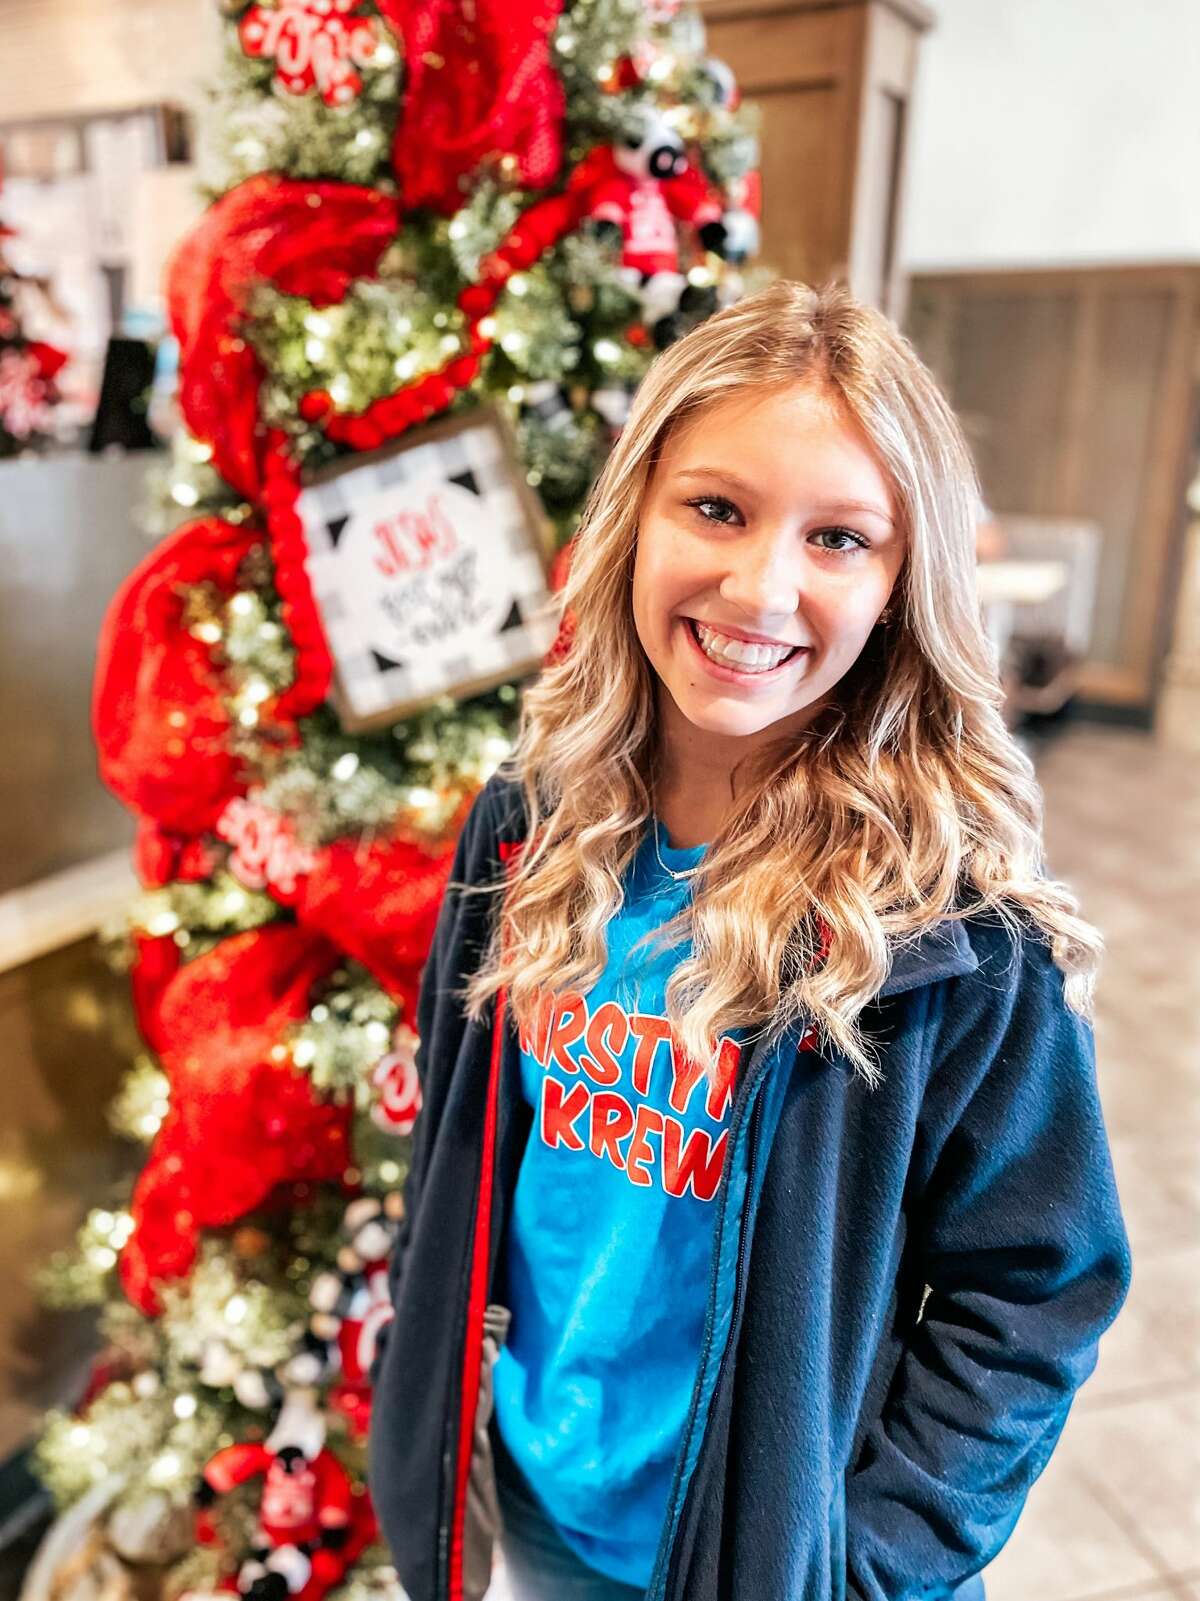 Paying it forward to foster kids was something that 15-year old Kirstyn Jackson felt strongly about, so she spearheaded her own nonprofit.